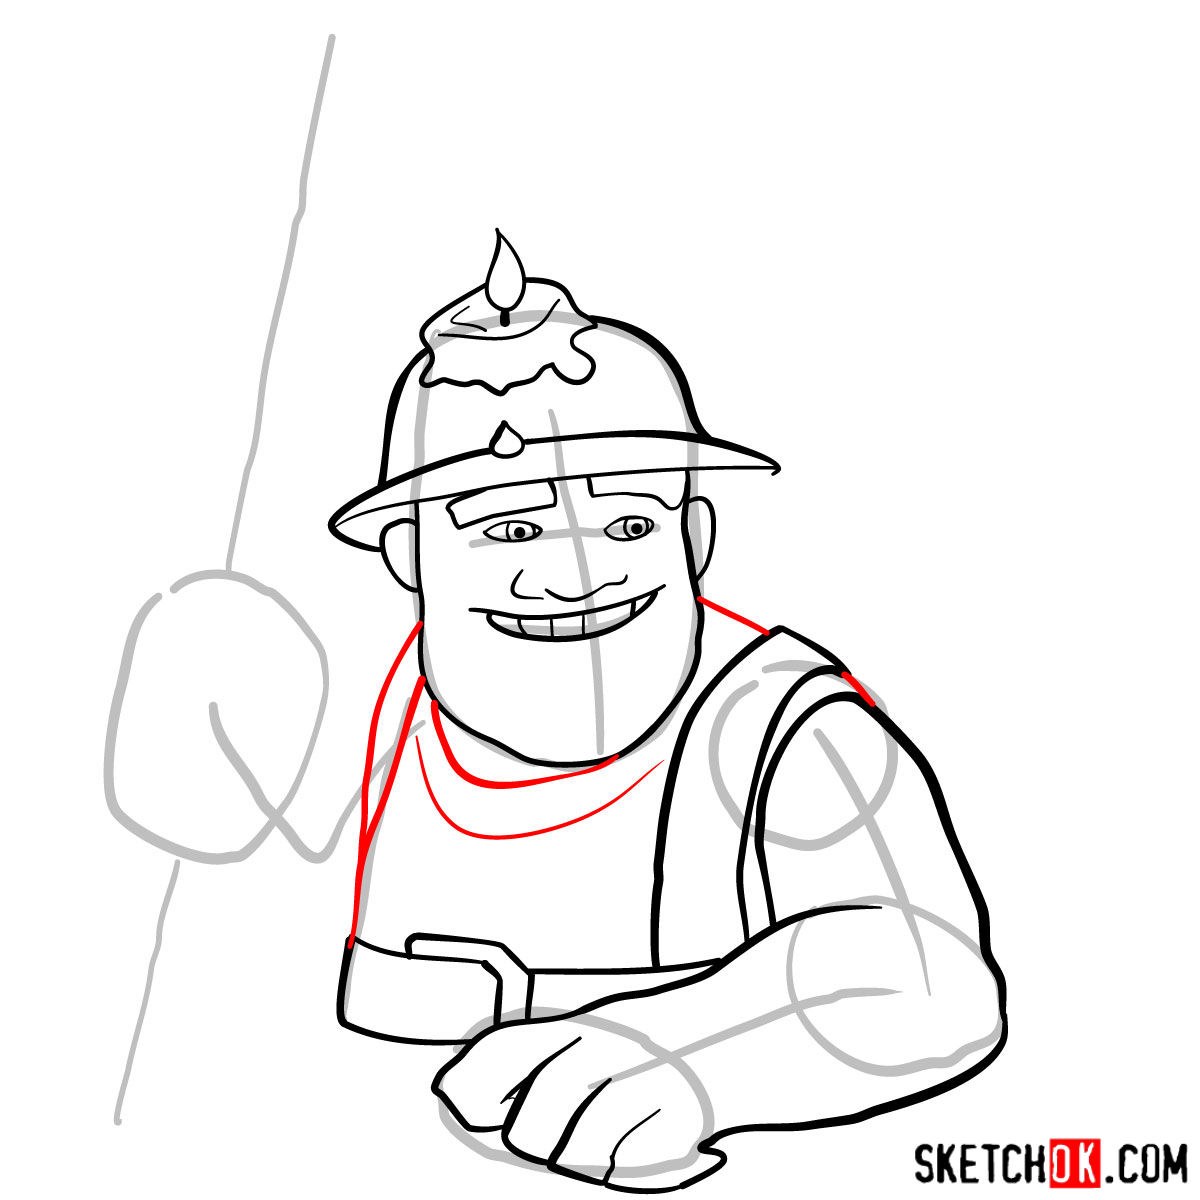 How to draw Miner from Clash of Clans game - step 08